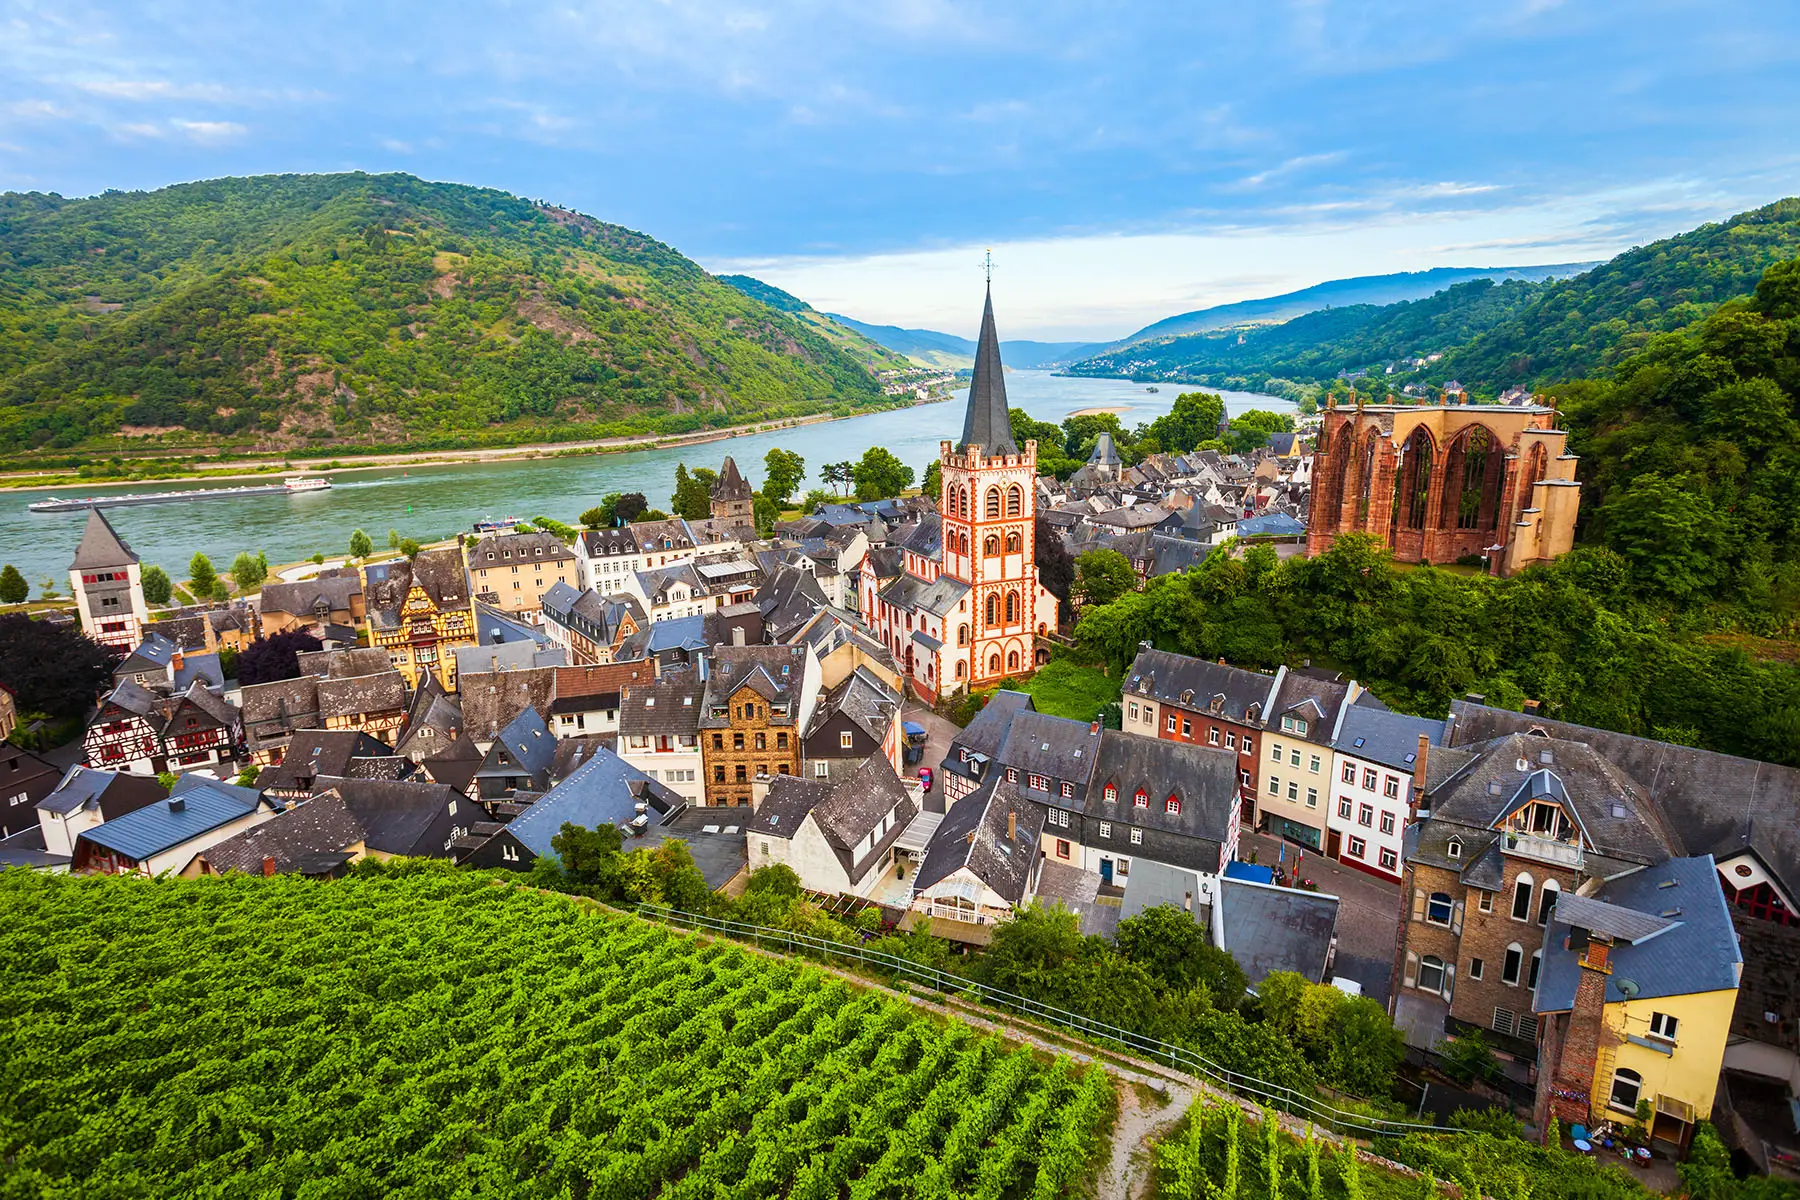 The village of Bacharach